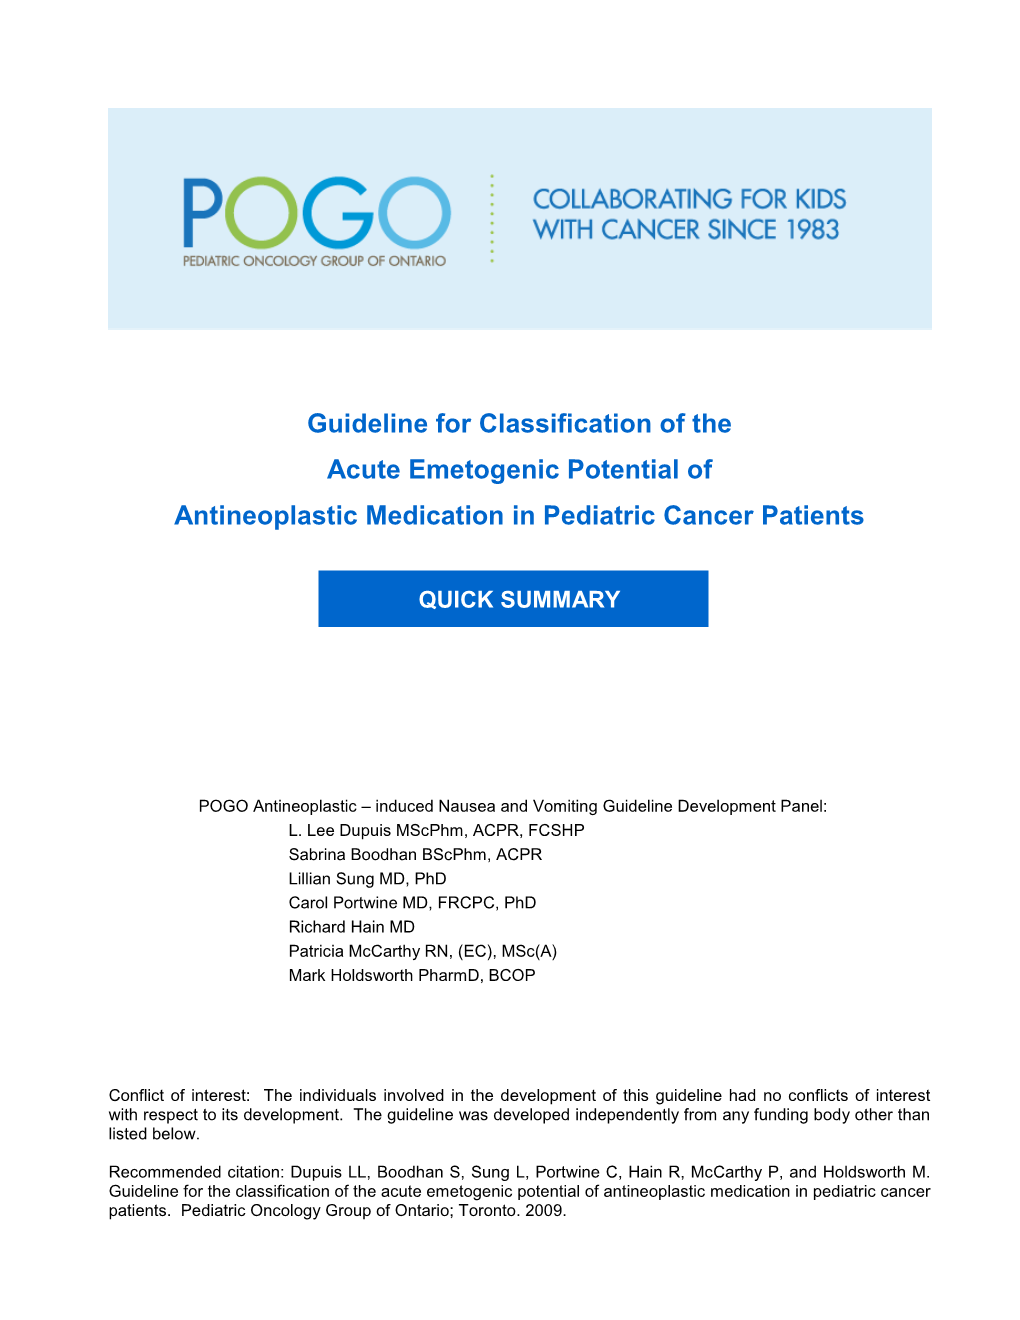 Guideline for Classification of the Acute Emetogenic Potential of Antineoplastic Medication in Pediatric Cancer Patients